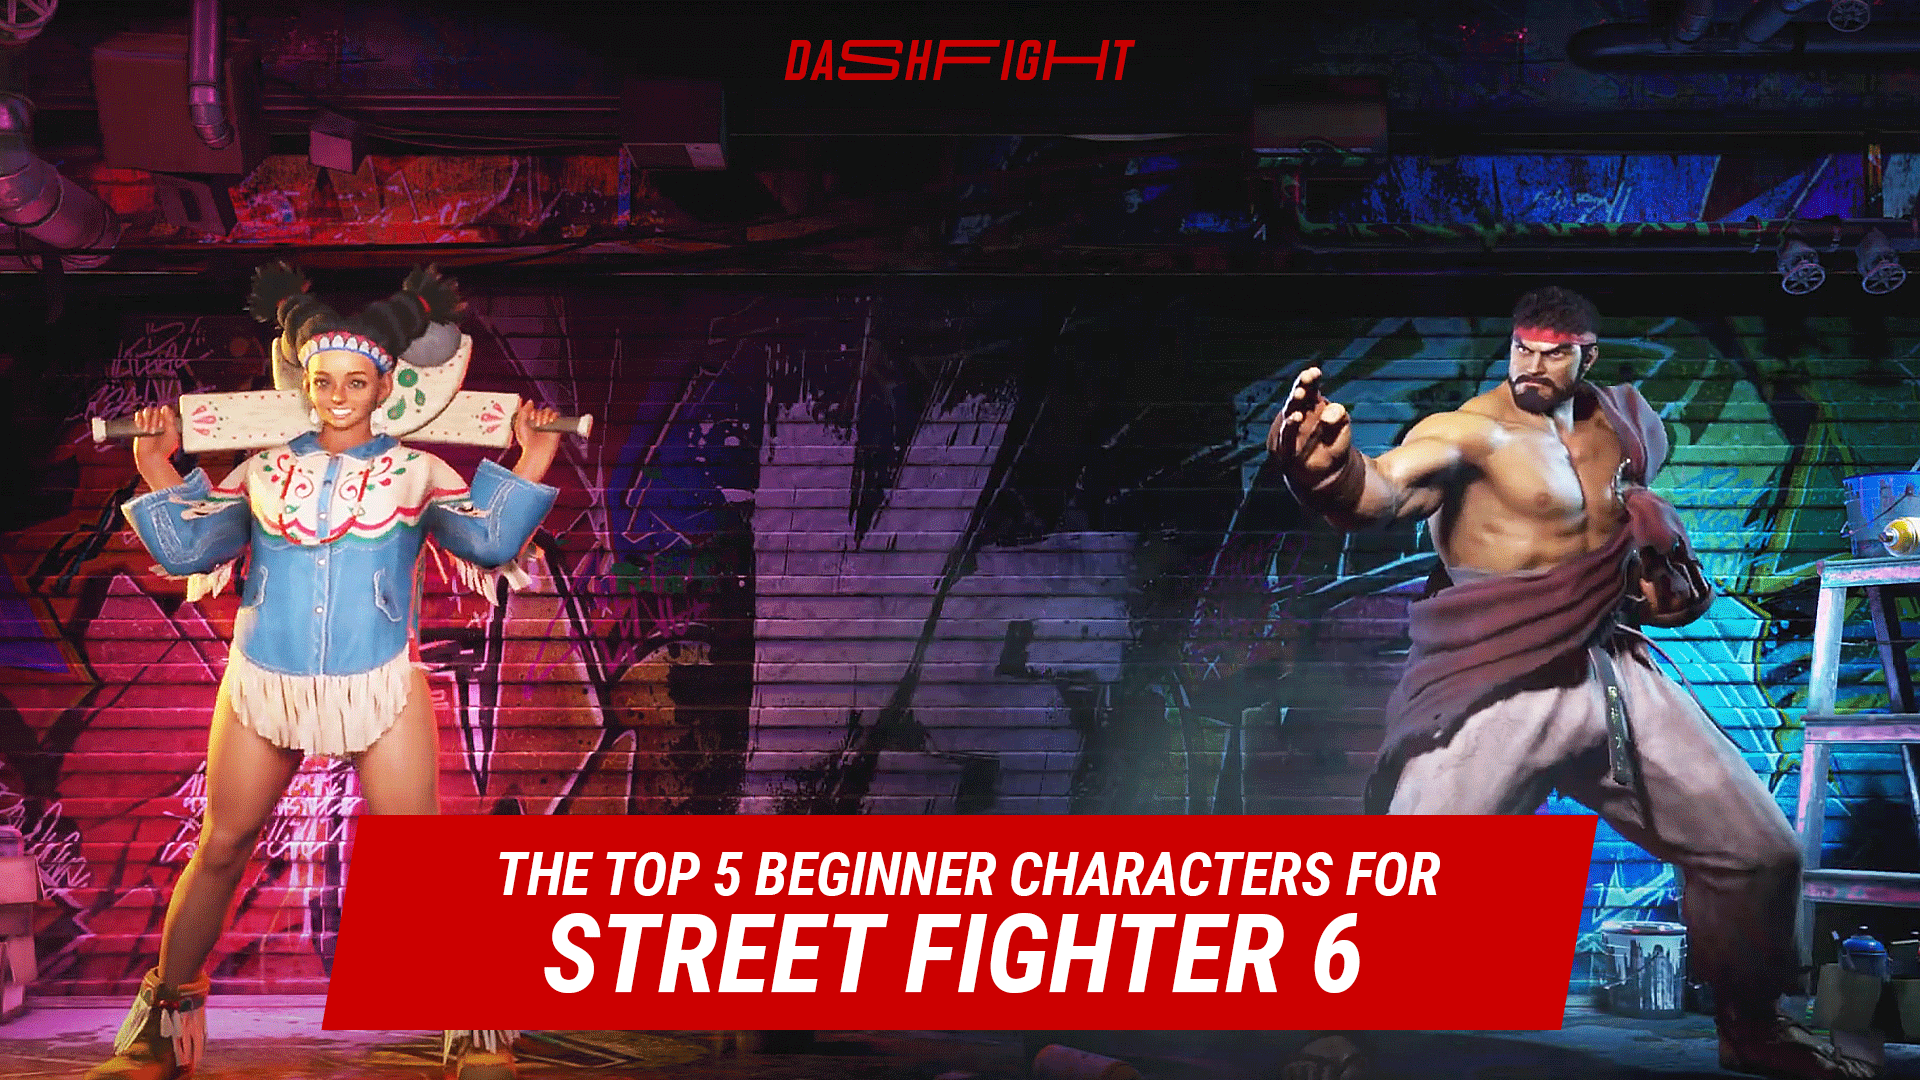 Is Vega Coming to Street Fighter 6? — Top 4 Missing Characters